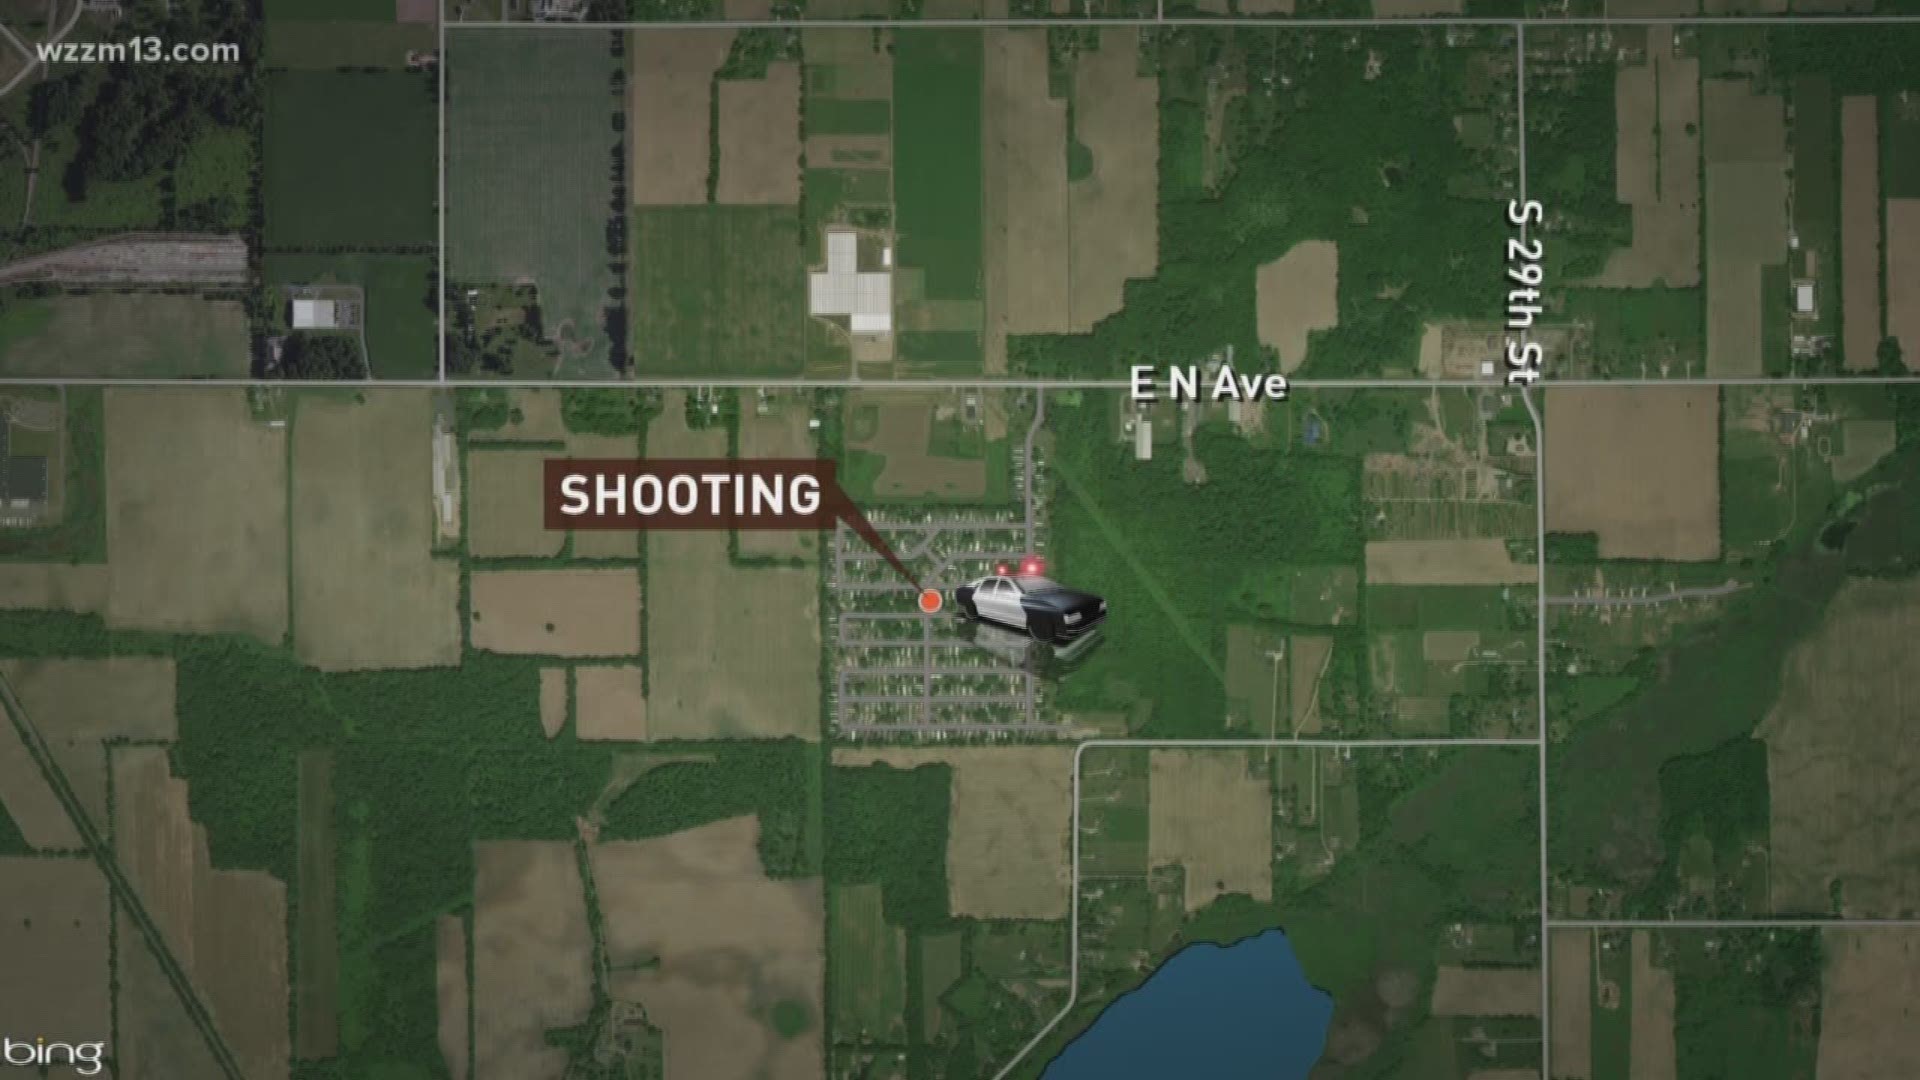 1 dead in officer-involved shooting